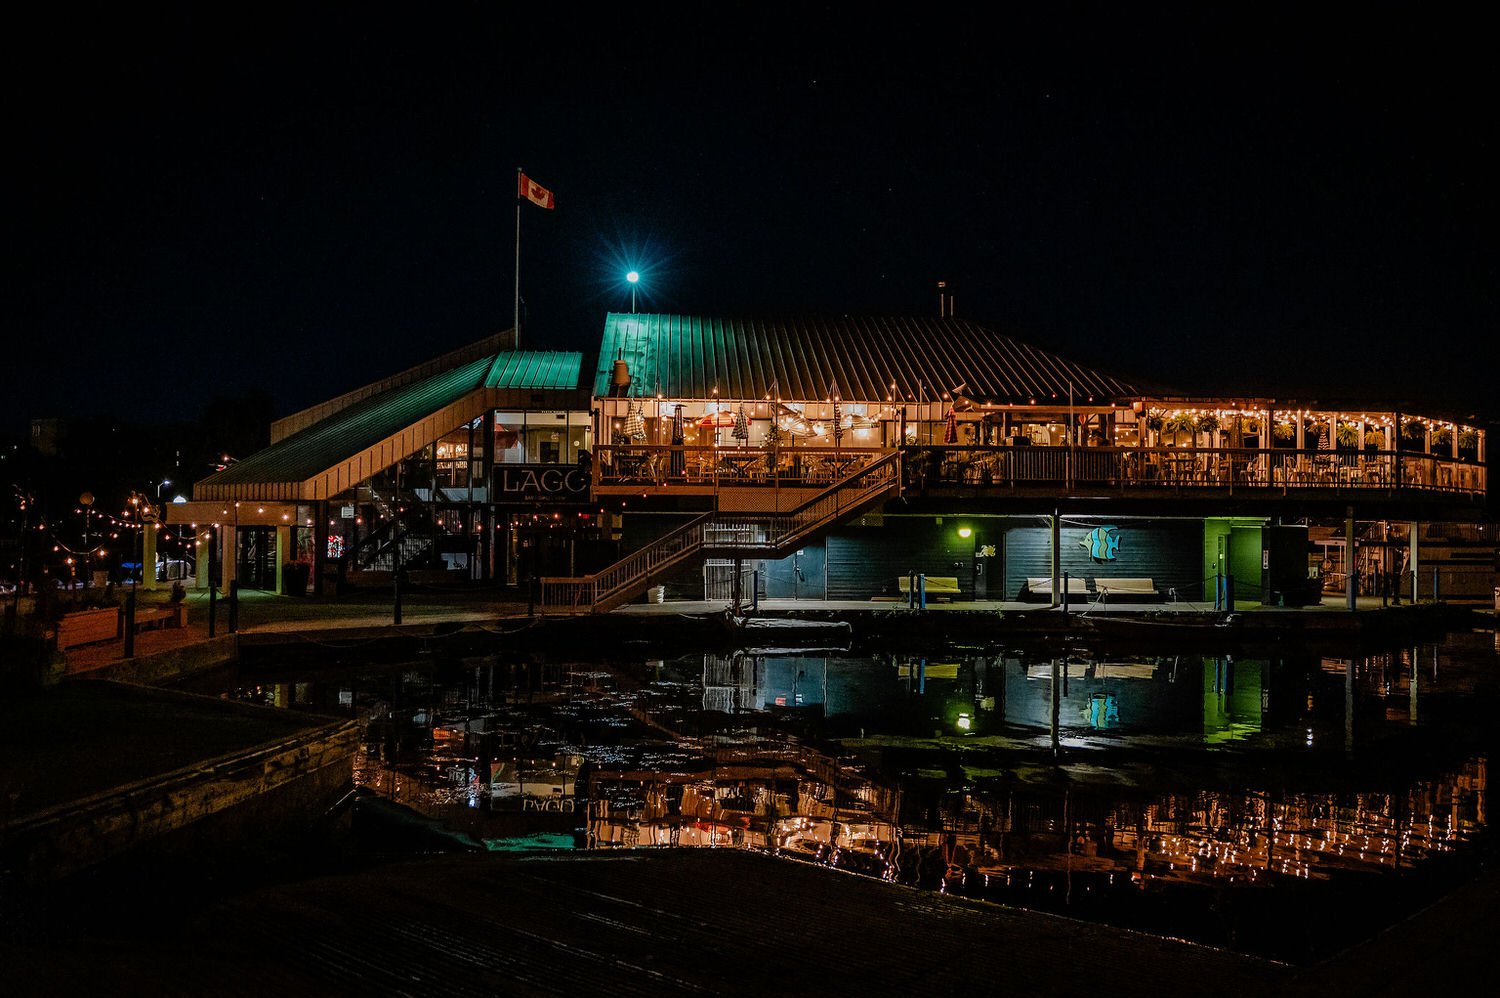 photograph of the exterior or Lago restaurant at night